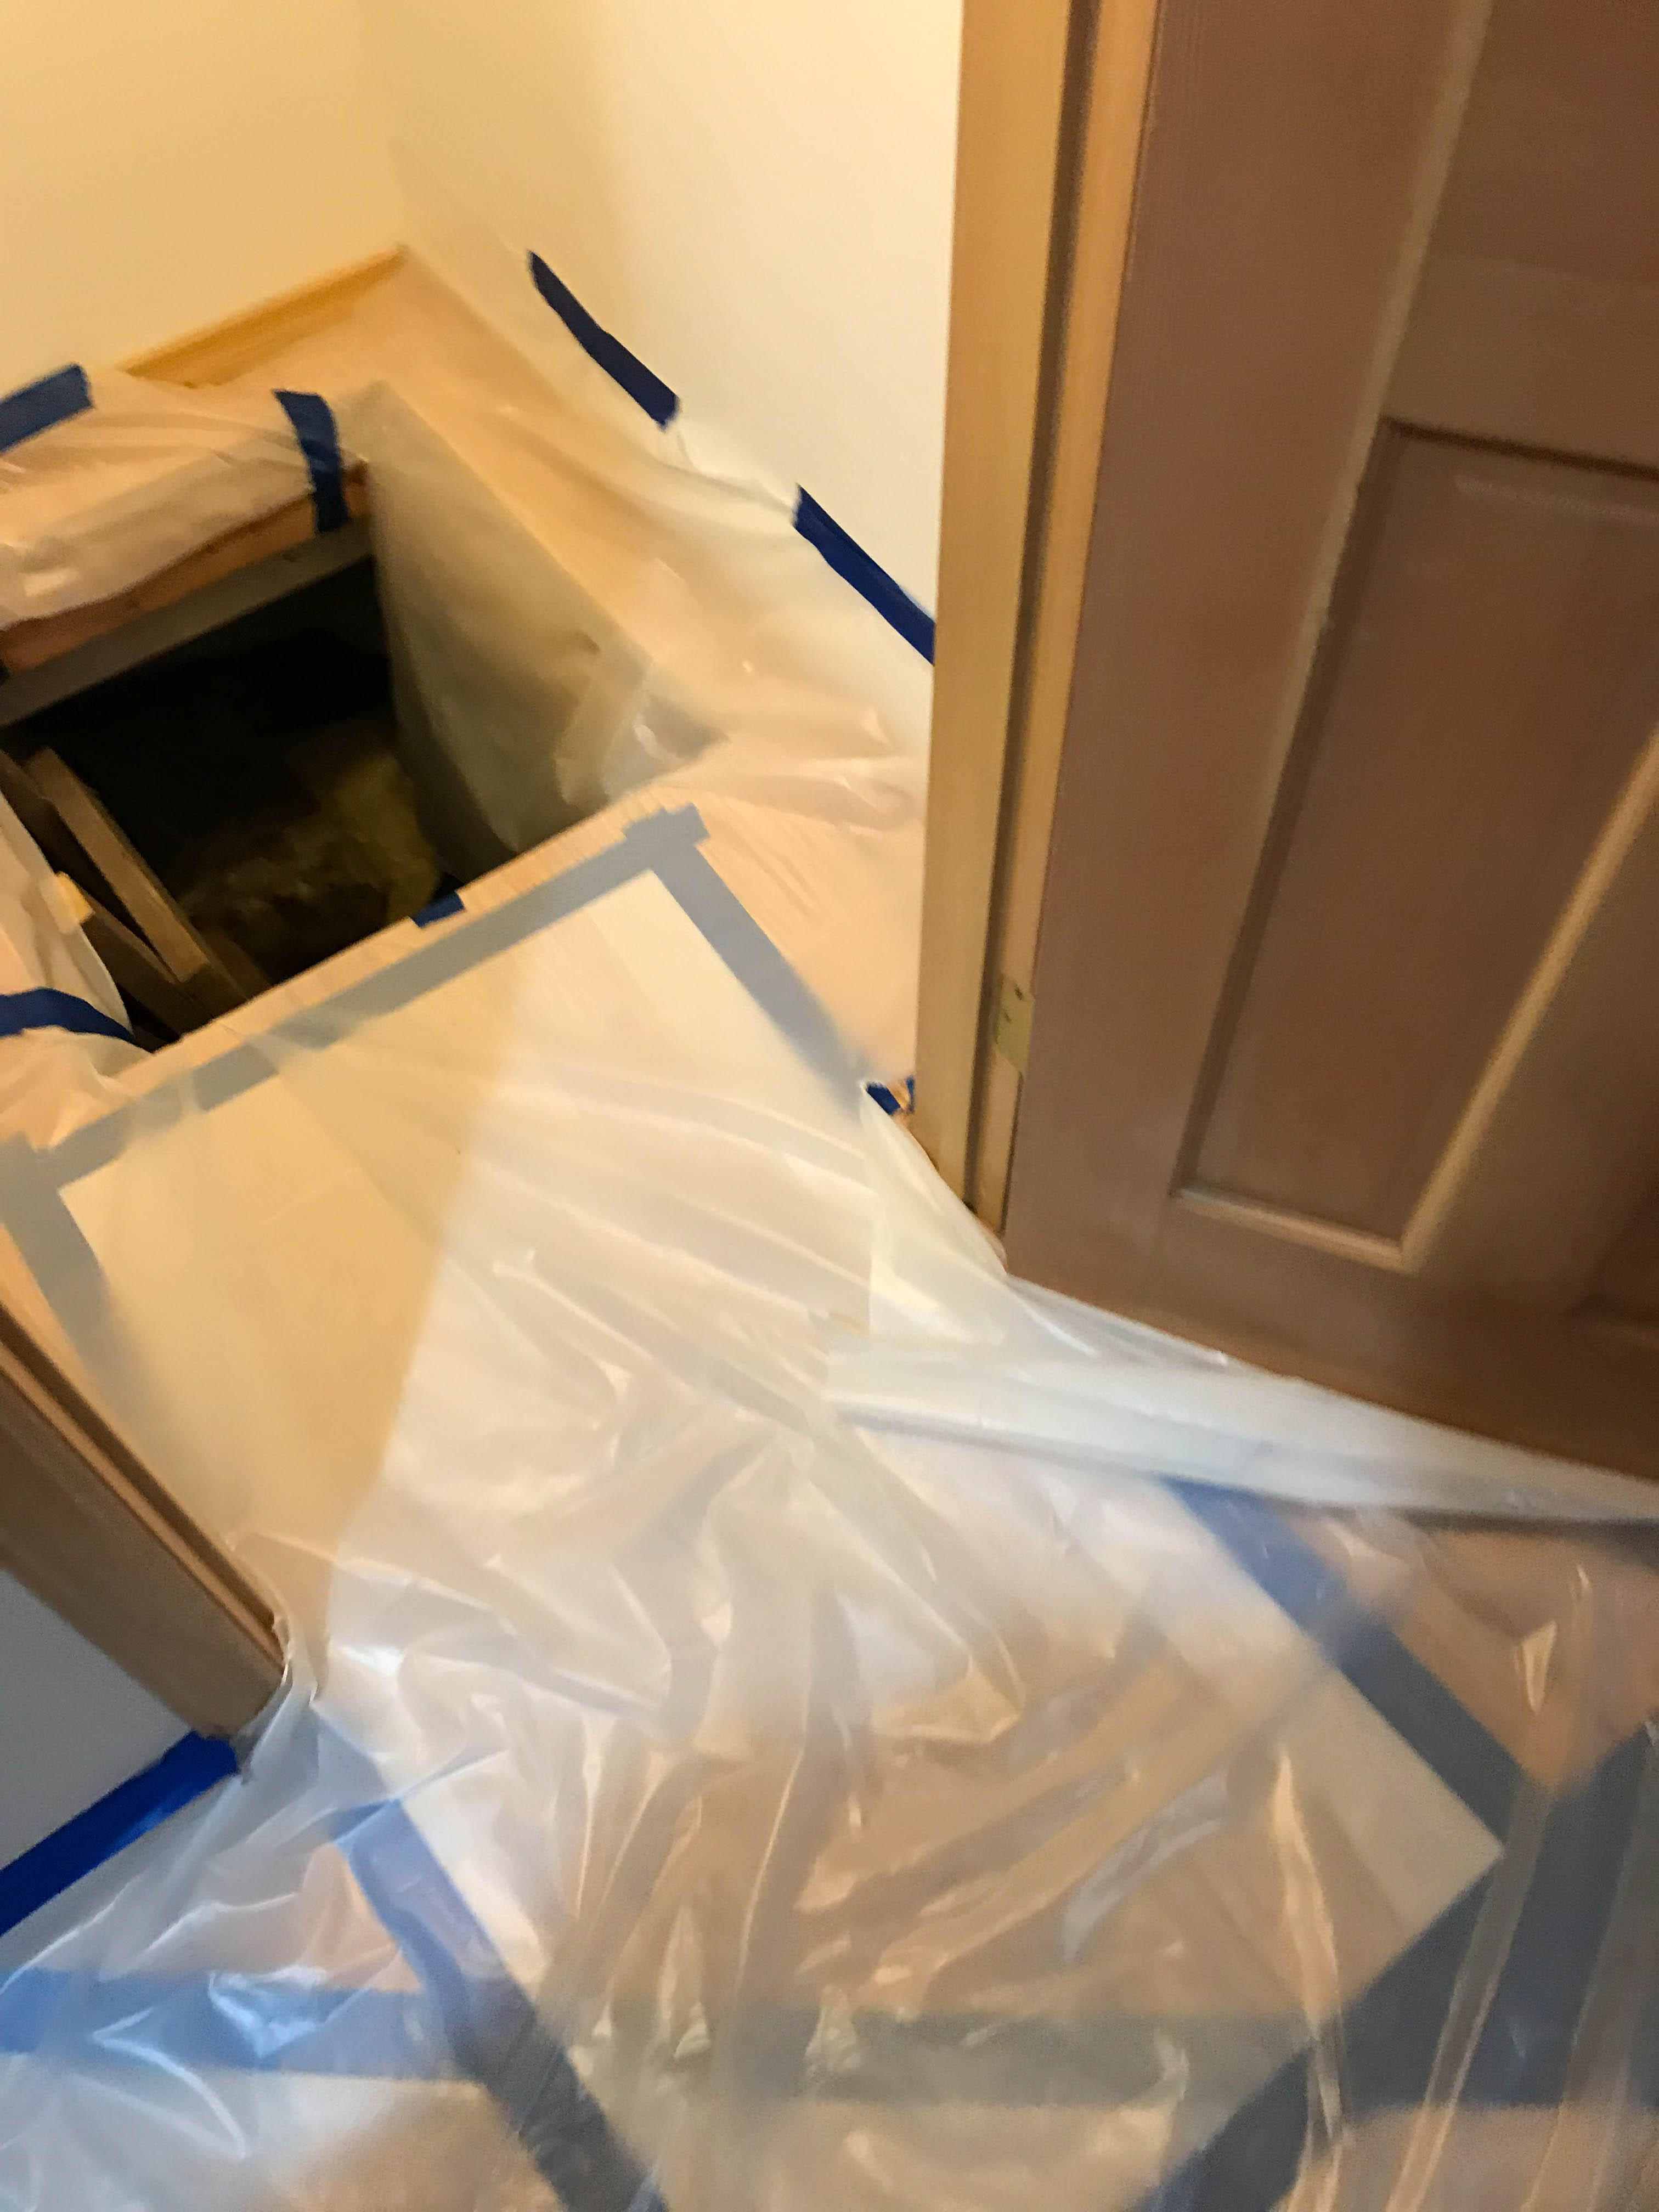 Plastic containment helps stabilize and protect your home while restoration is underway!